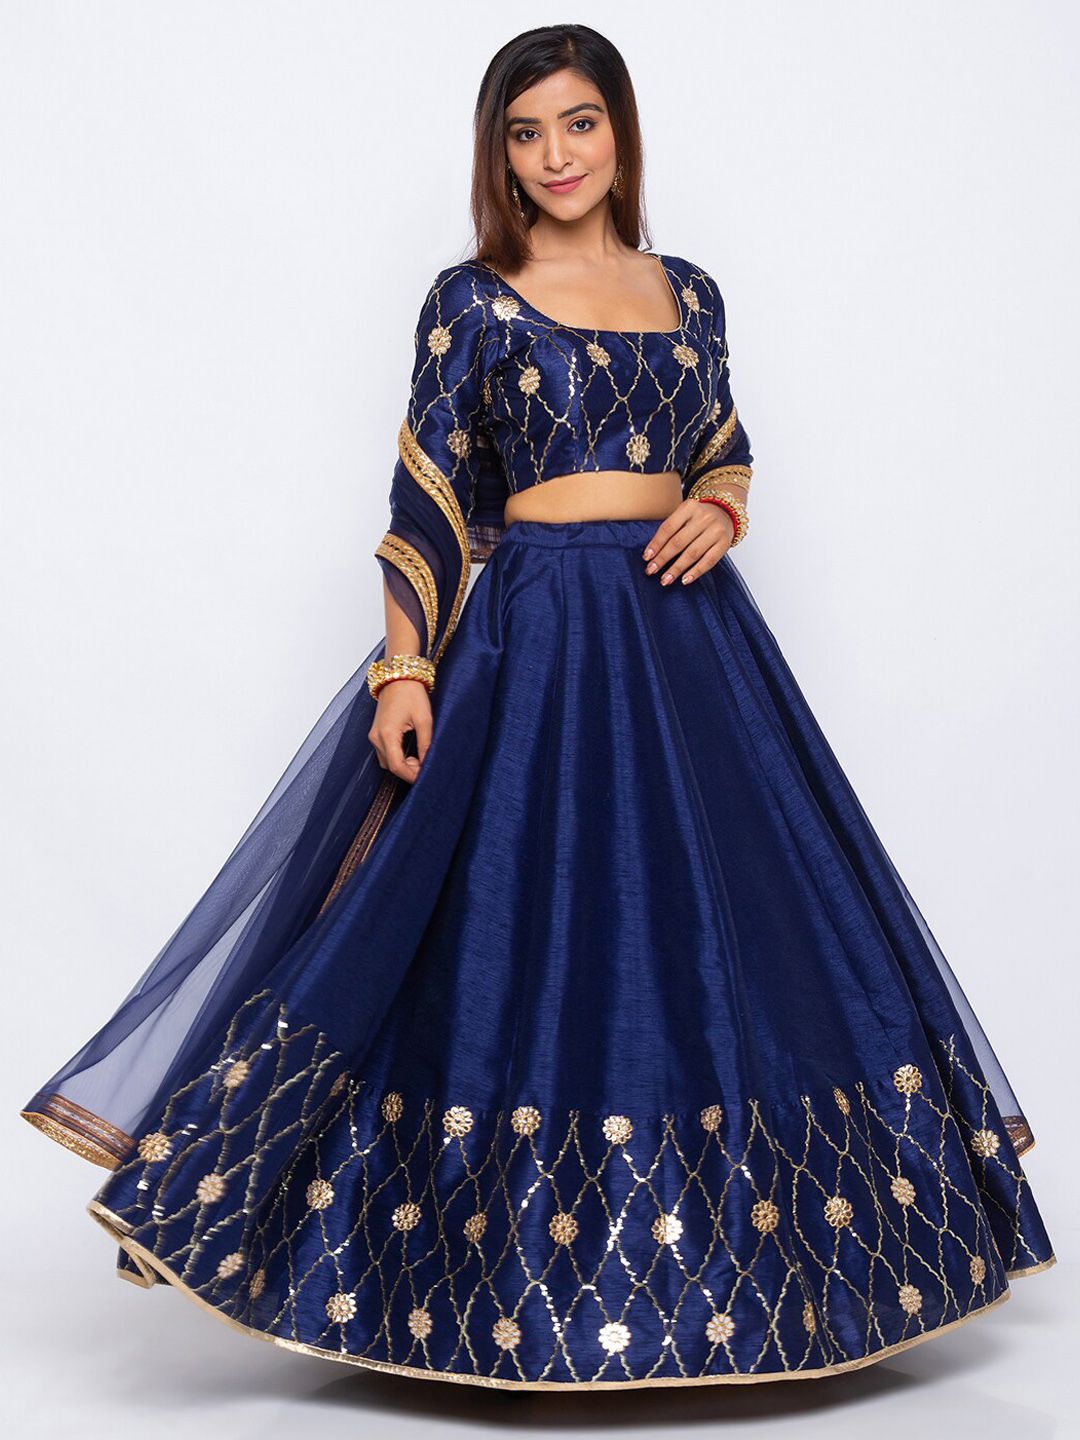 6Y COLLECTIVE Navy & Gold-Toned Semi-stitched Lehenga-unstitched blouse &stitched dupatta Price in India